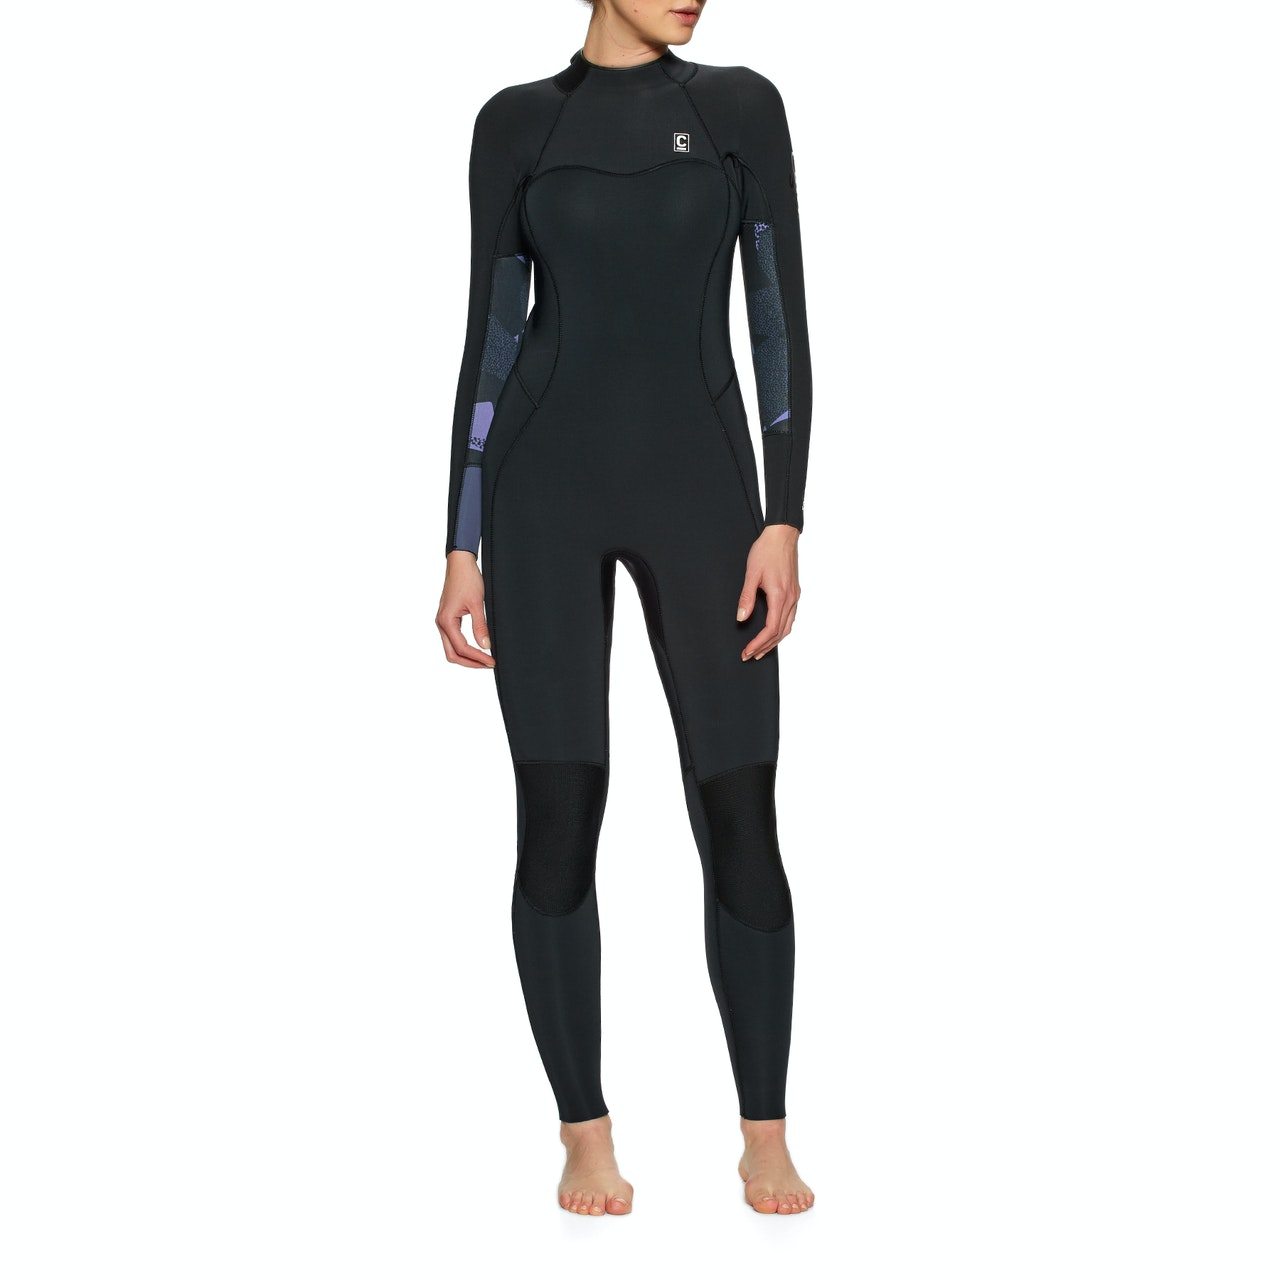 C-Skins Solace 3:2 Wogbs Back Zip Steamer Womens Wetsuit - Raven Black/unity/green Ash